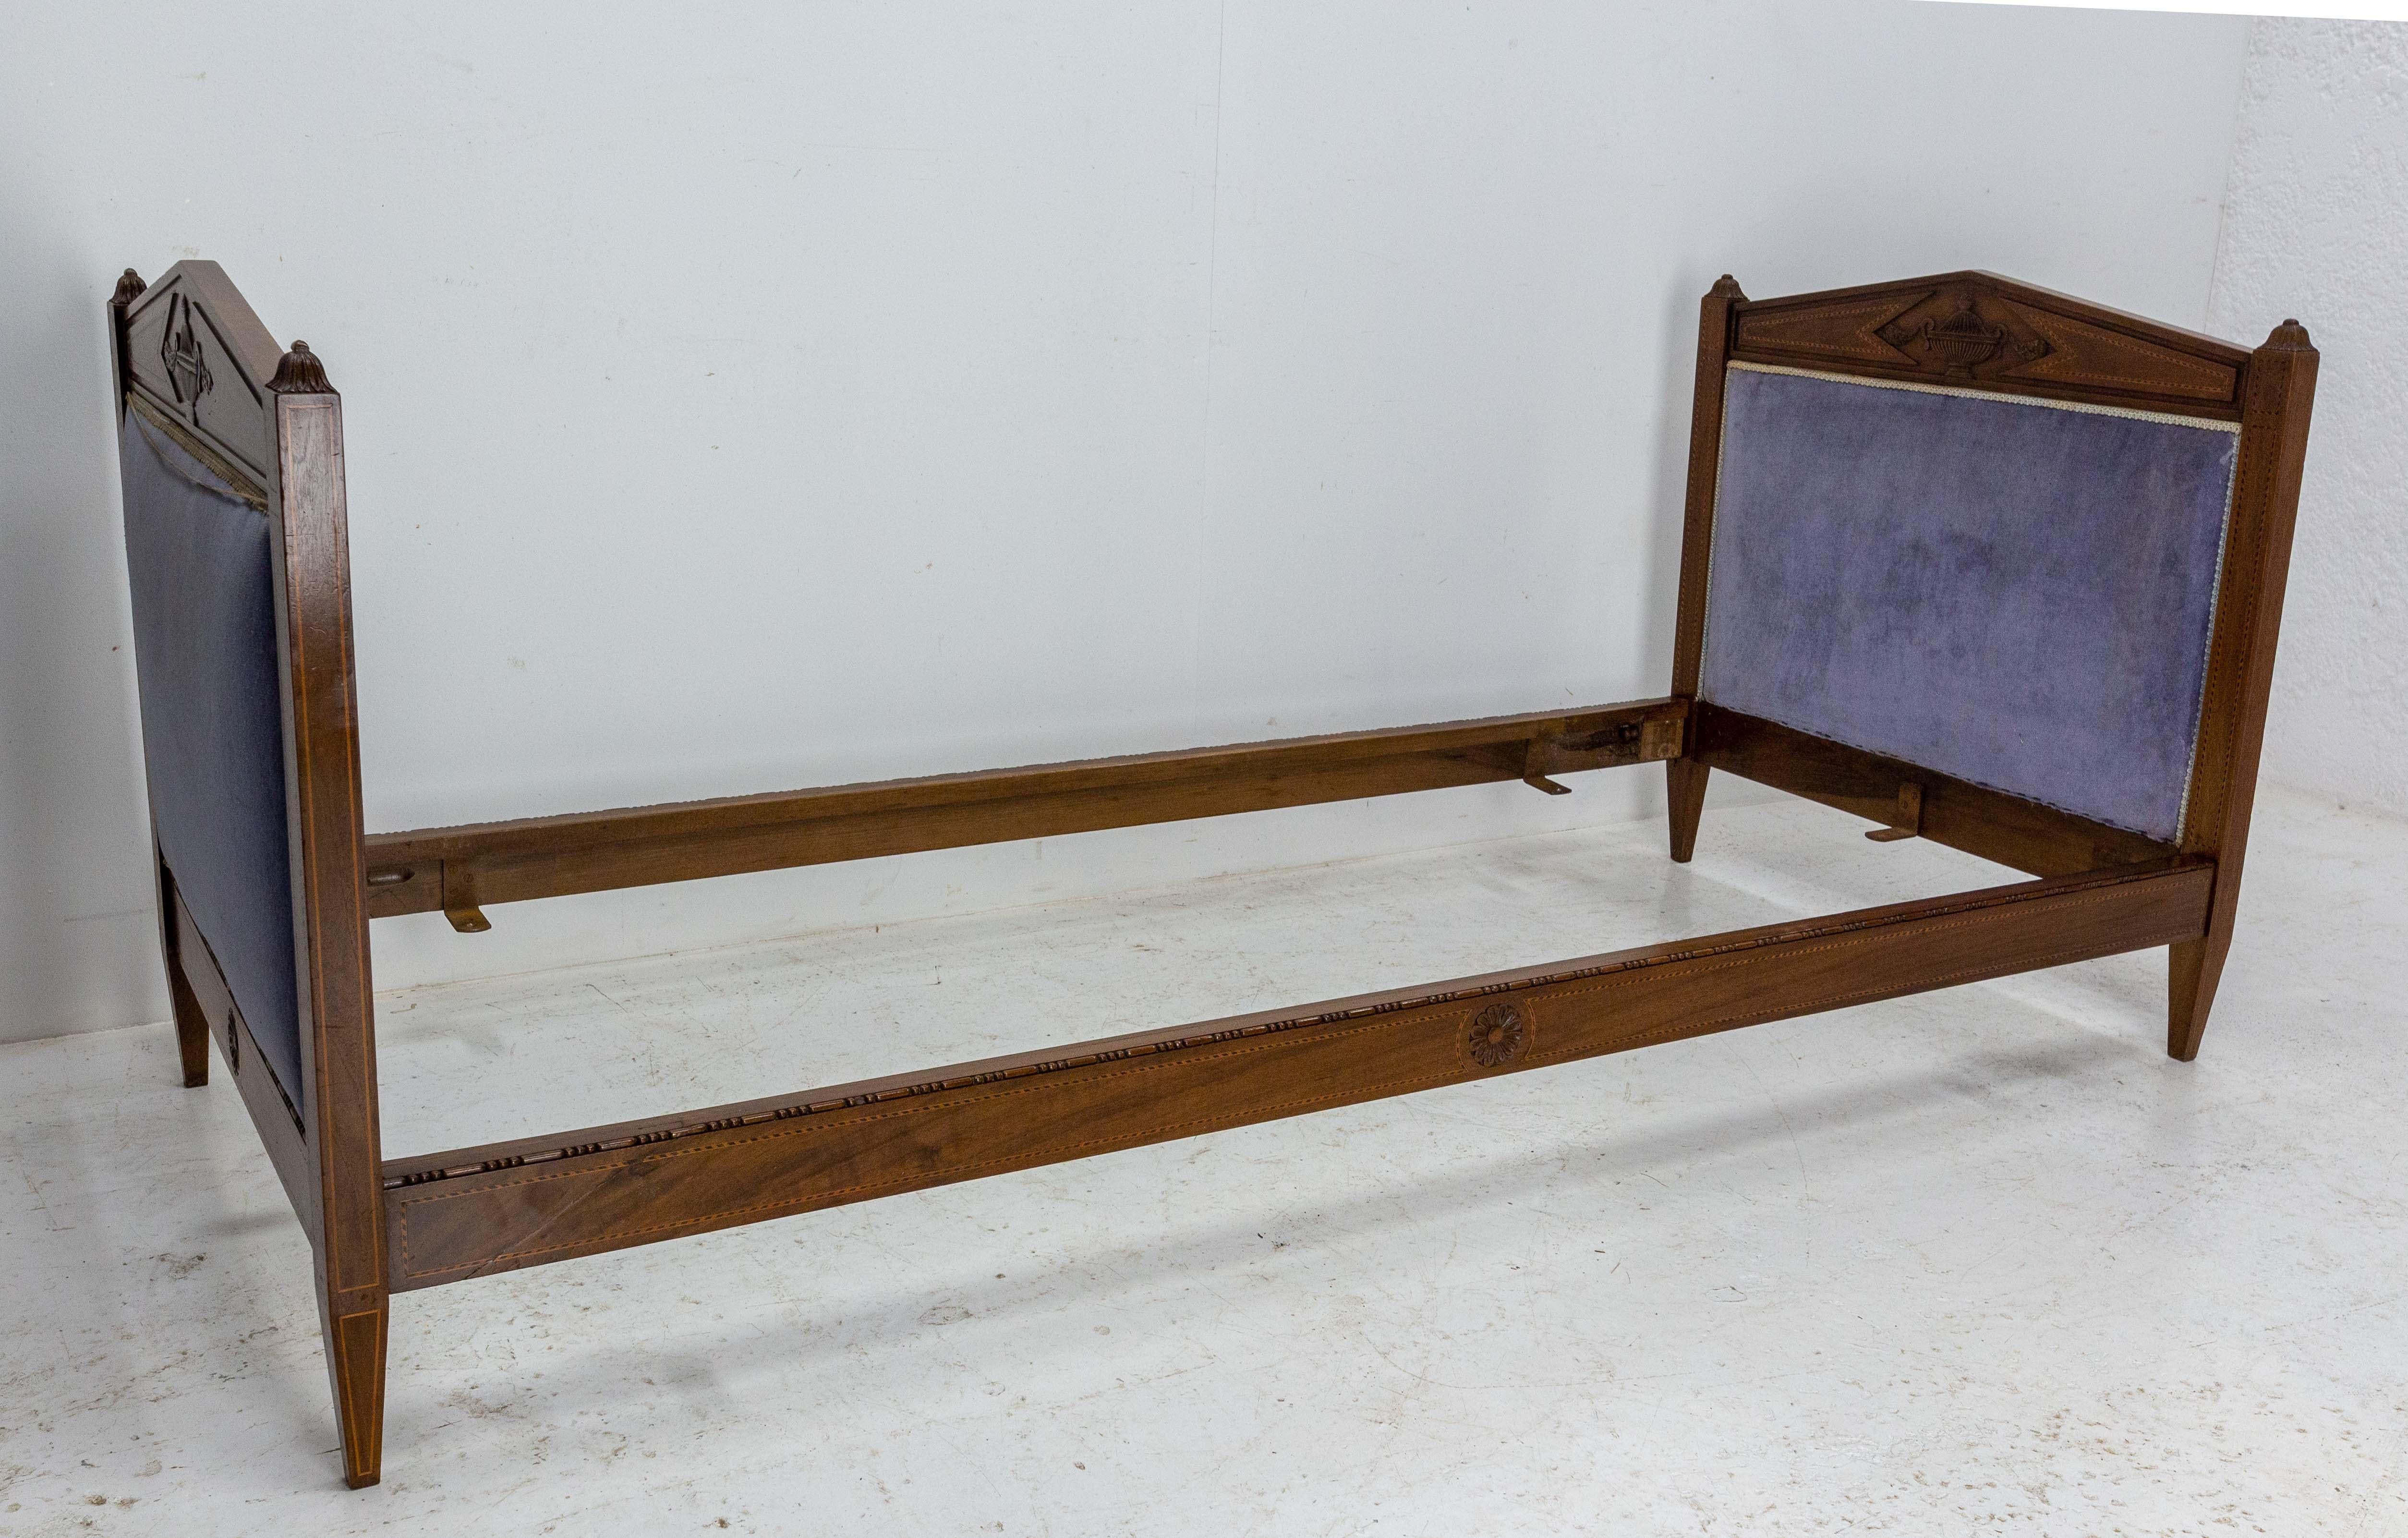 Walnut French Directoire walnut Sofa Banquette Carved and Inlayed, Early 19th Century For Sale